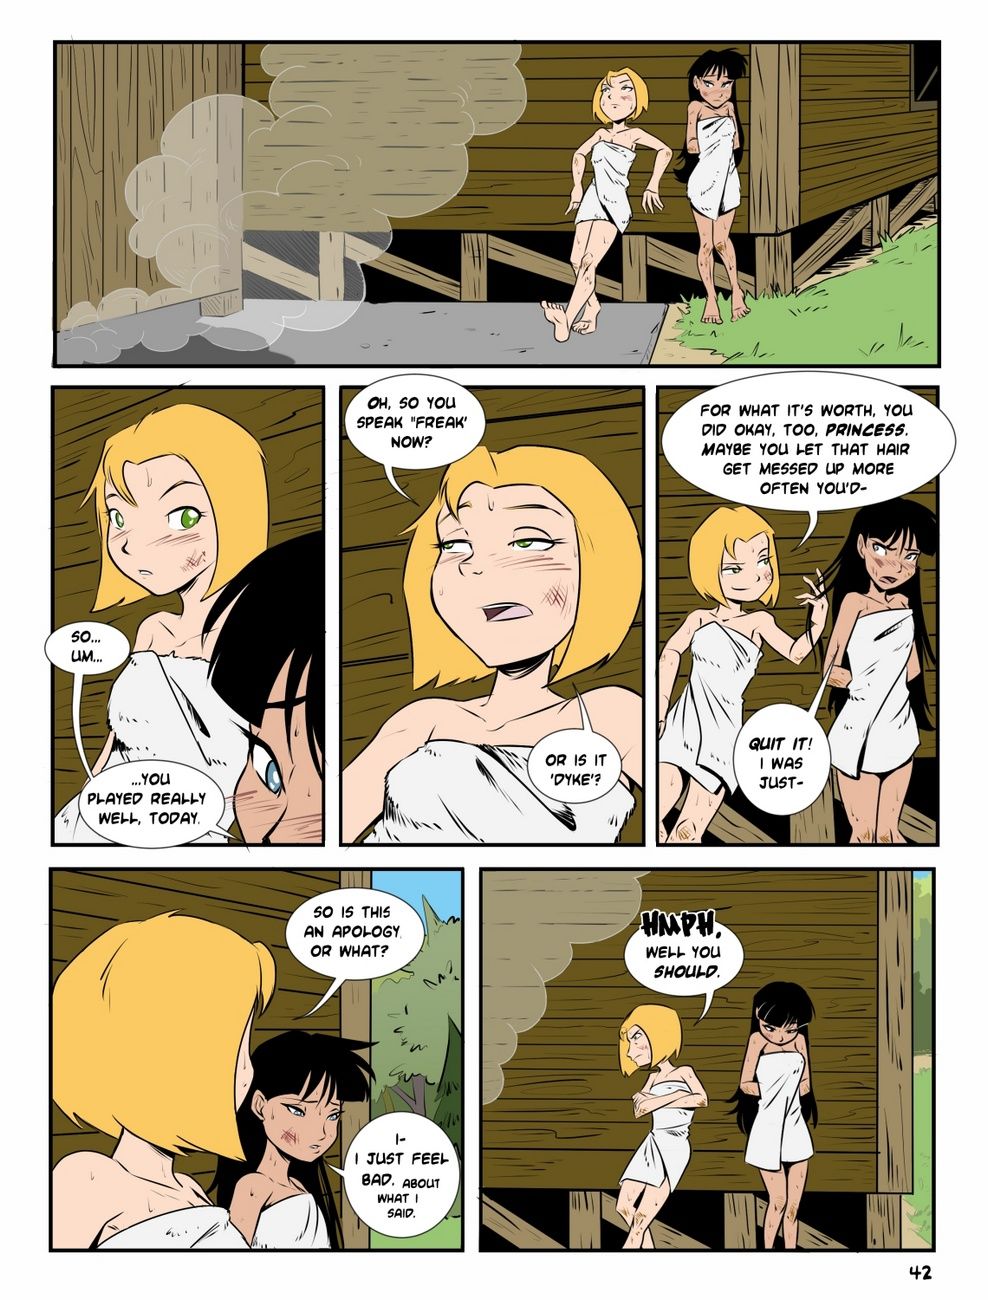 Camp Sherwood [Mr.D] (Ongoing) page 43